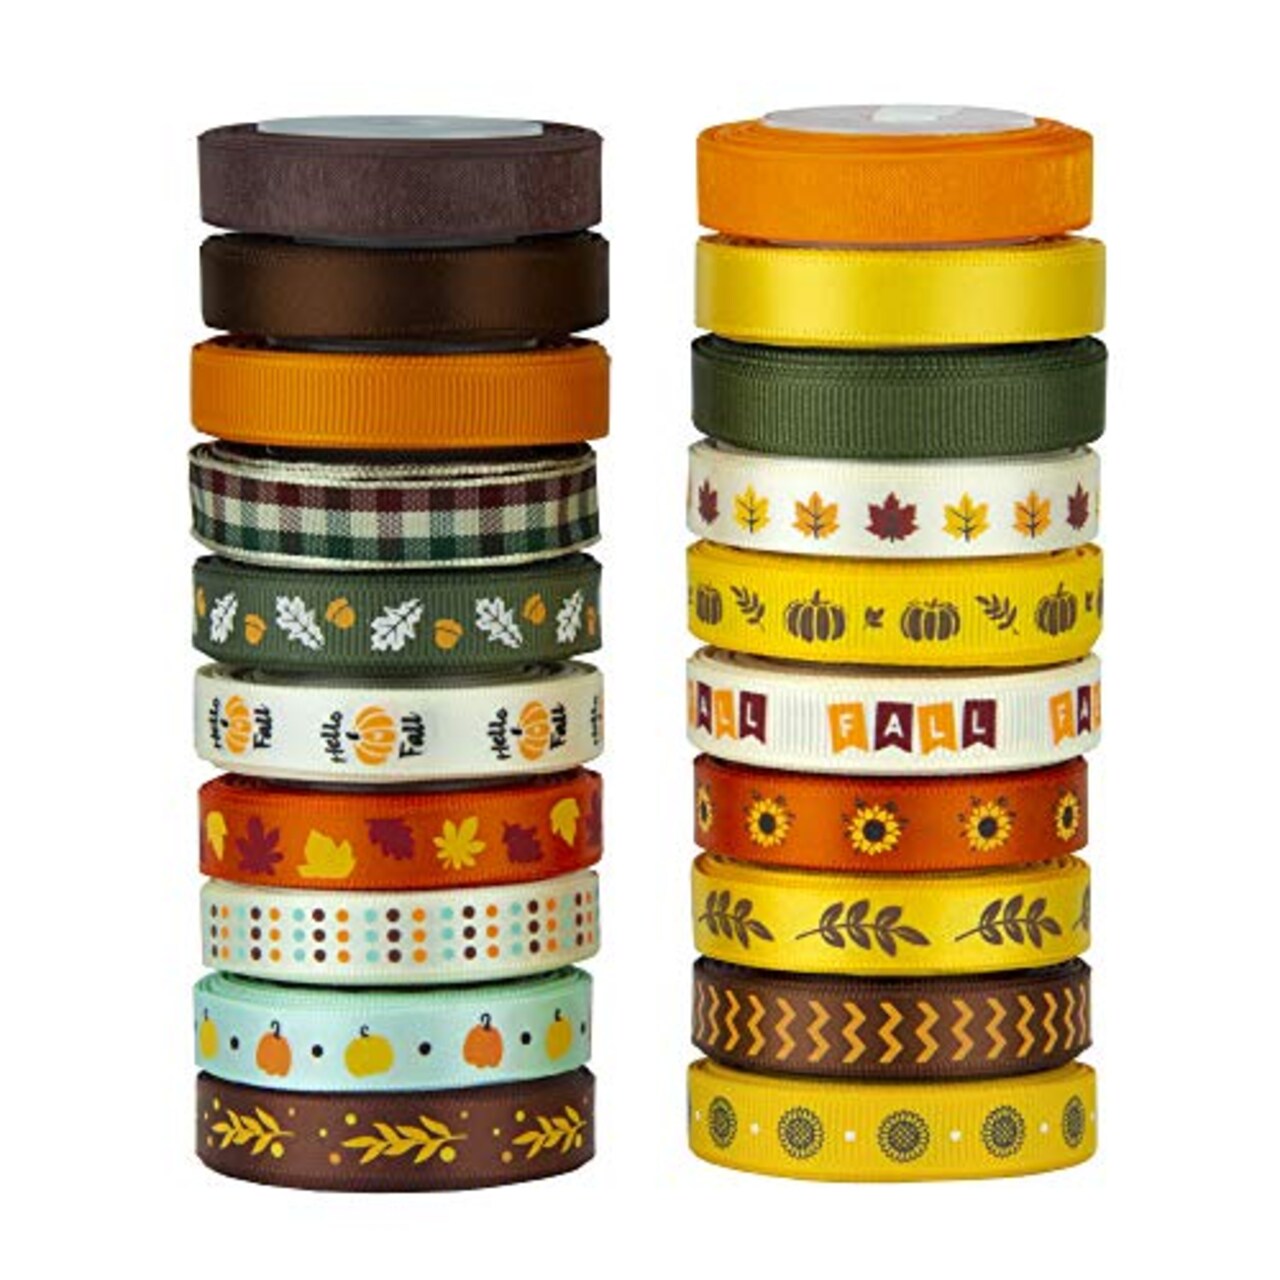 VATIN Fall Ribbon 3/8 Inch 20 Rolls X 330Fts(110Yards) Autumn Harvest  Festival Ribbons Printed Grosgrain Ribbons Polyester Satin Ribbon Sheer  Organze Ribbon for Gift Wrapping DIY Crafts Fall Decor